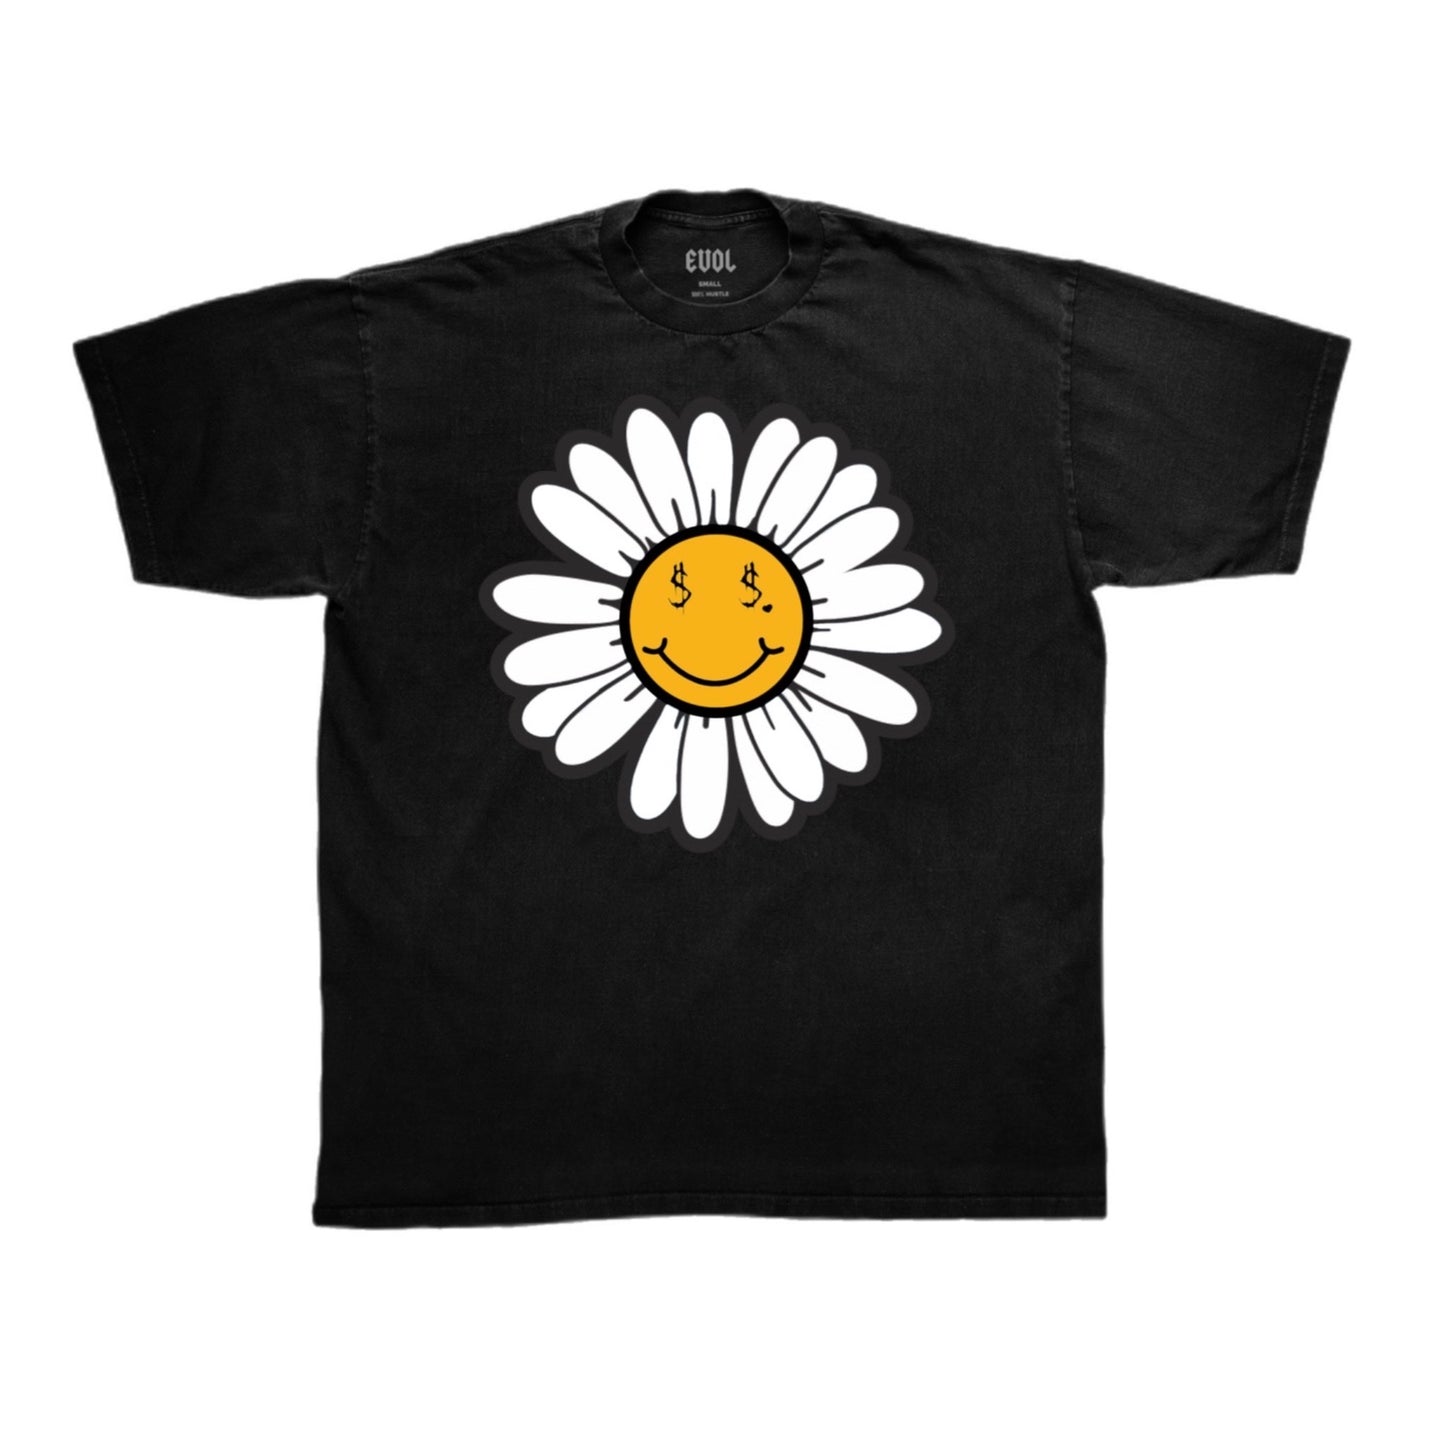 EVOL F*CK PEACE FLOWER TEE BLACK AND  YELLOW